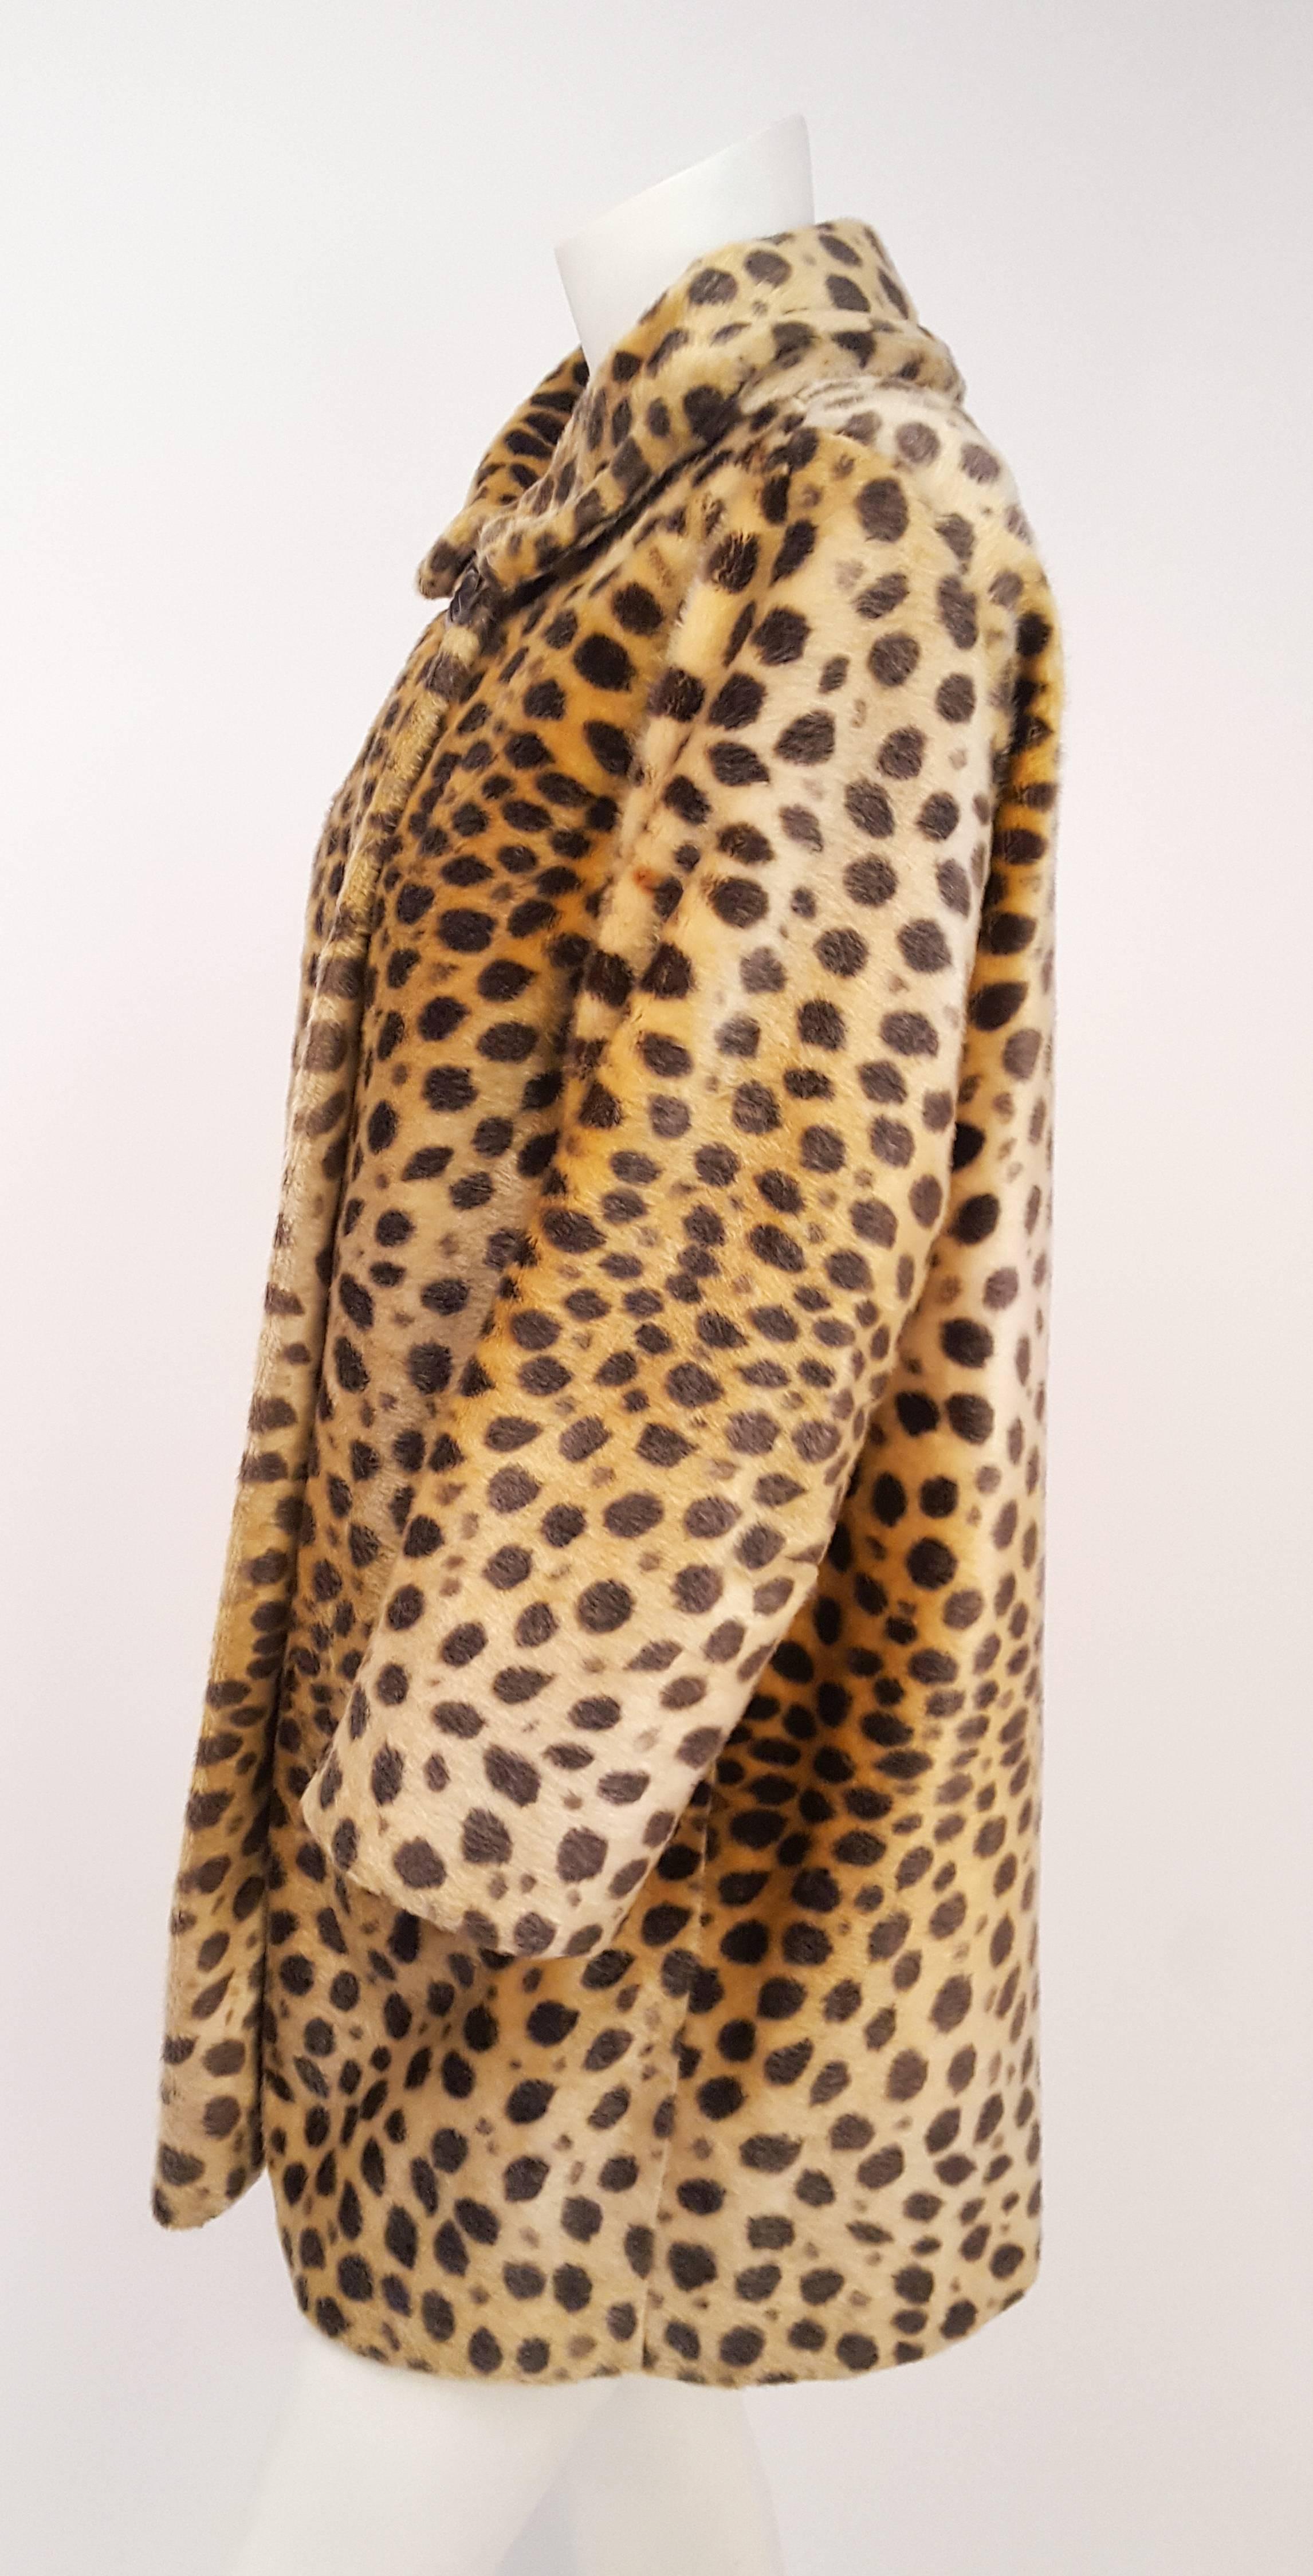 1960s Russel Taylor Leopard Print Coat. Front button closure. Fully lined. Side pockets. Approx size 6.